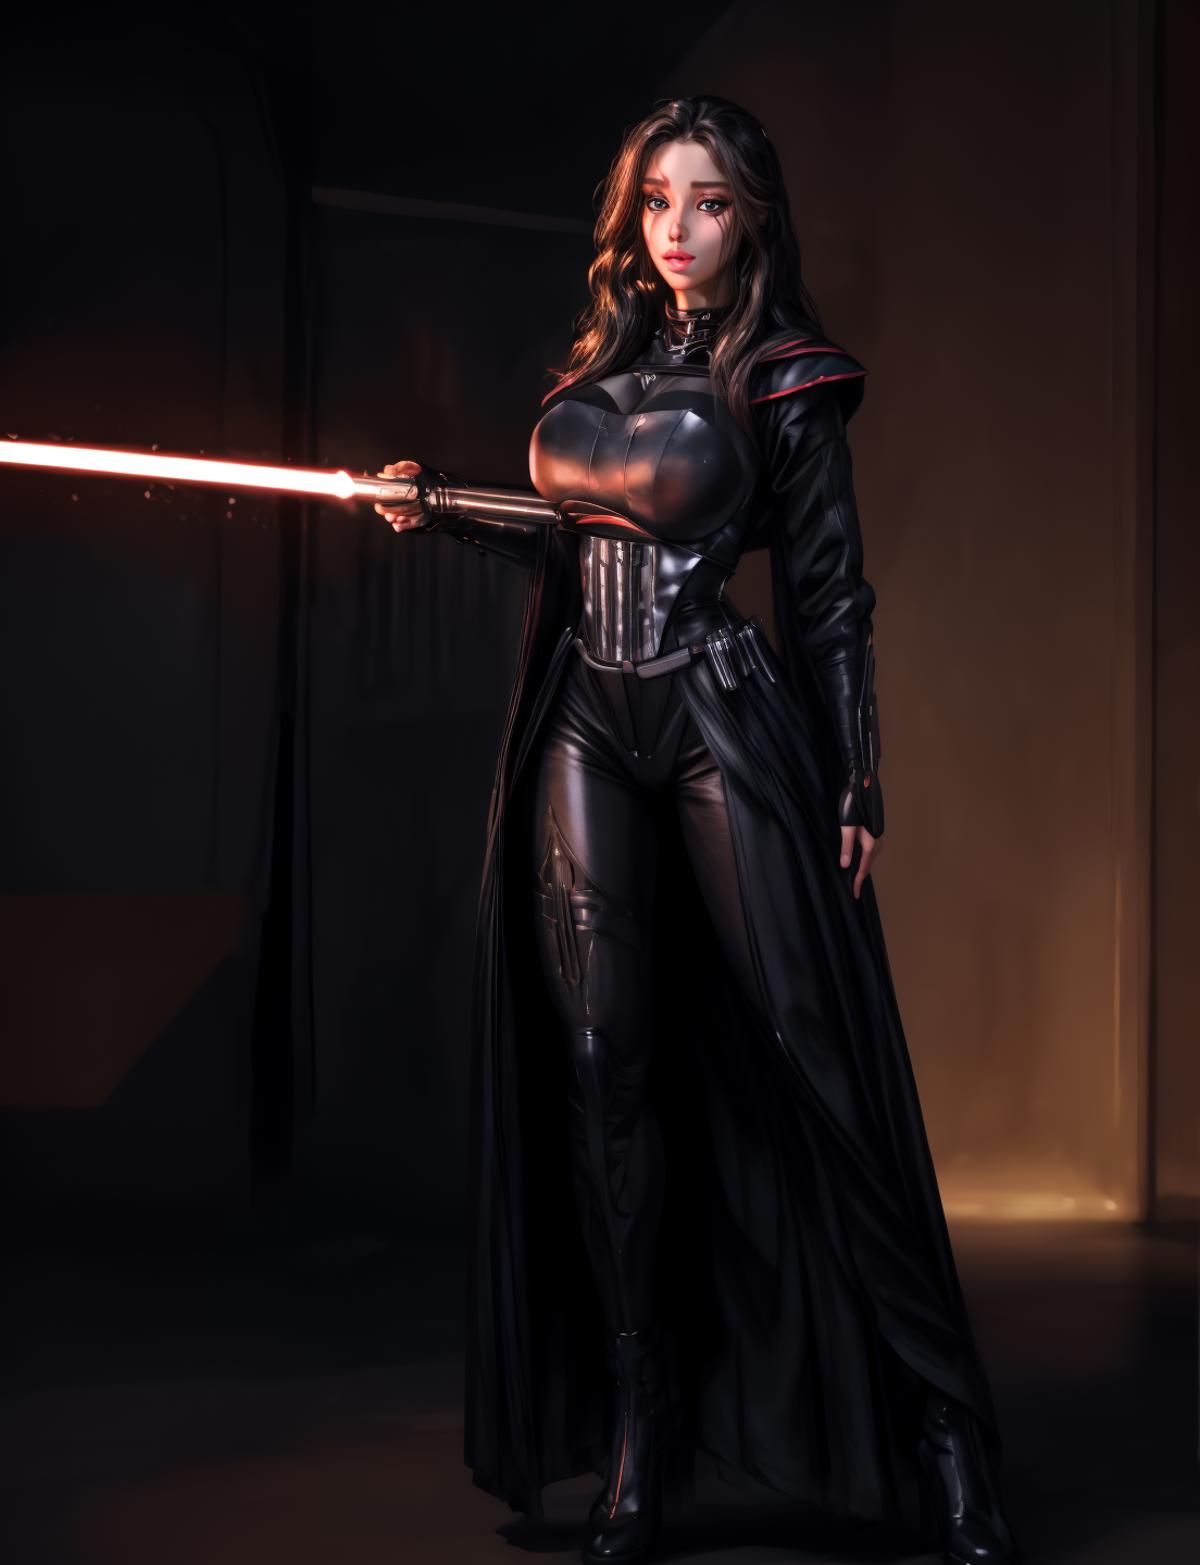 Star Wars sith outfit image by bluefish12